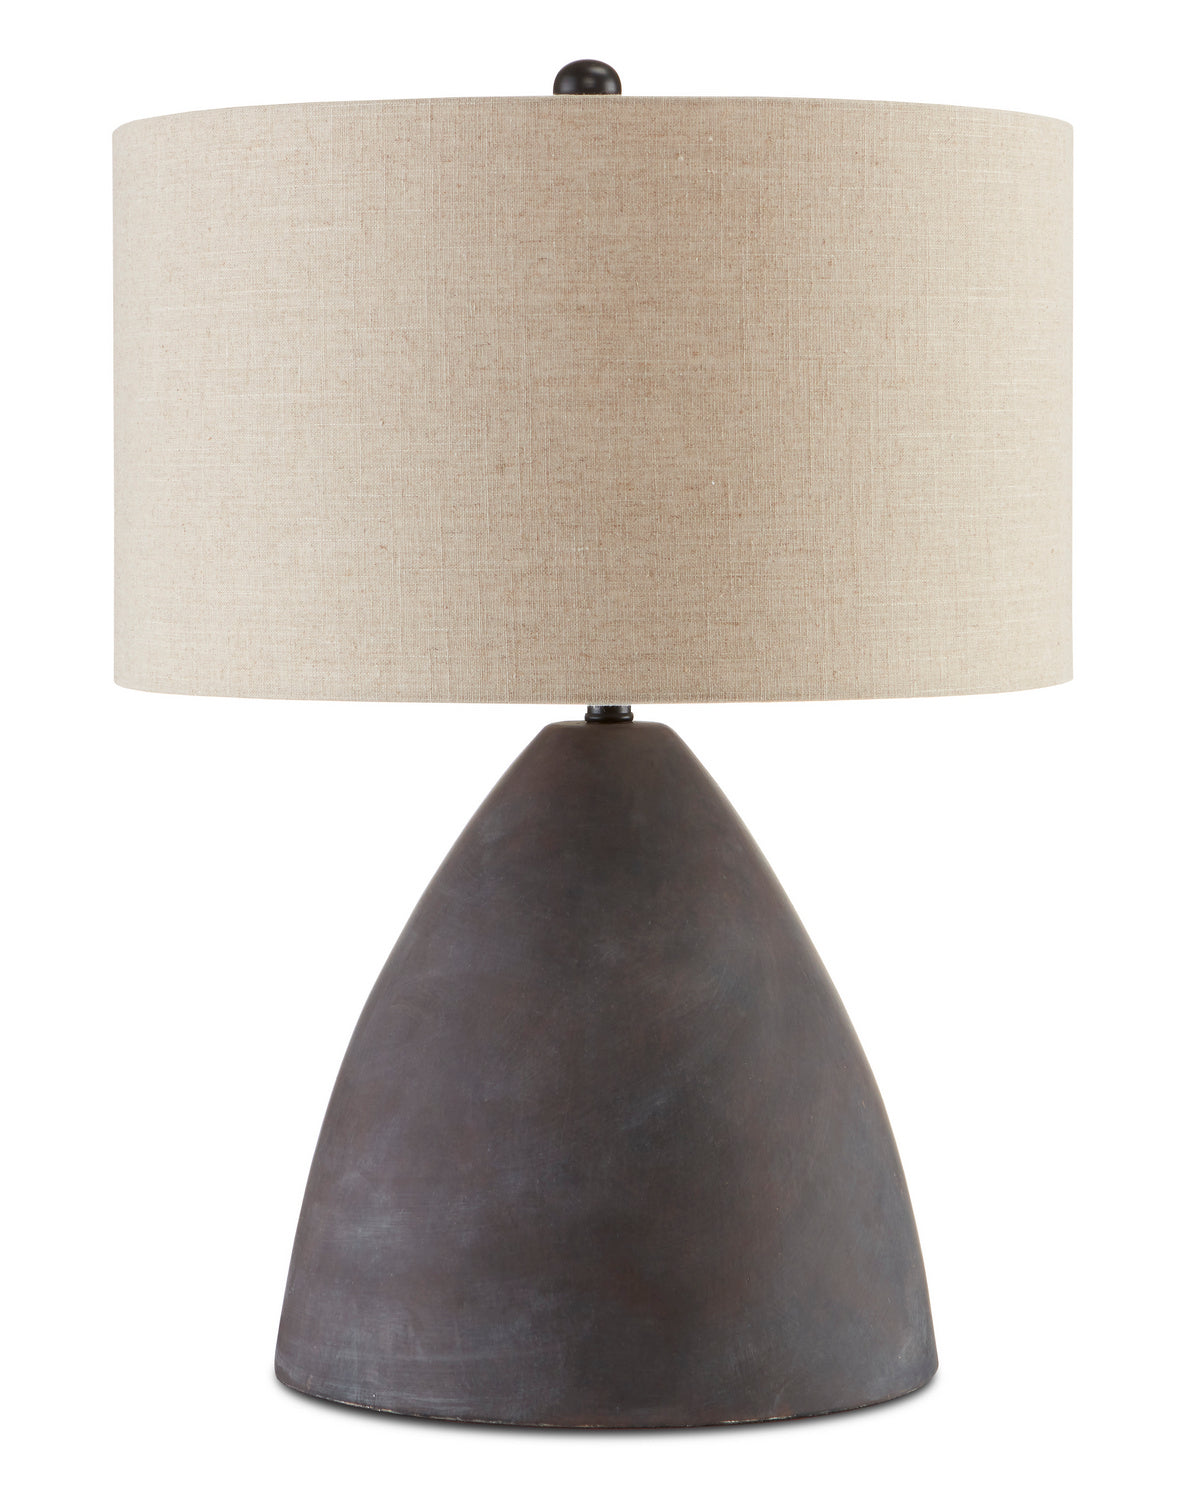 One Light Table Lamp from the Zea collection in Antique Black finish